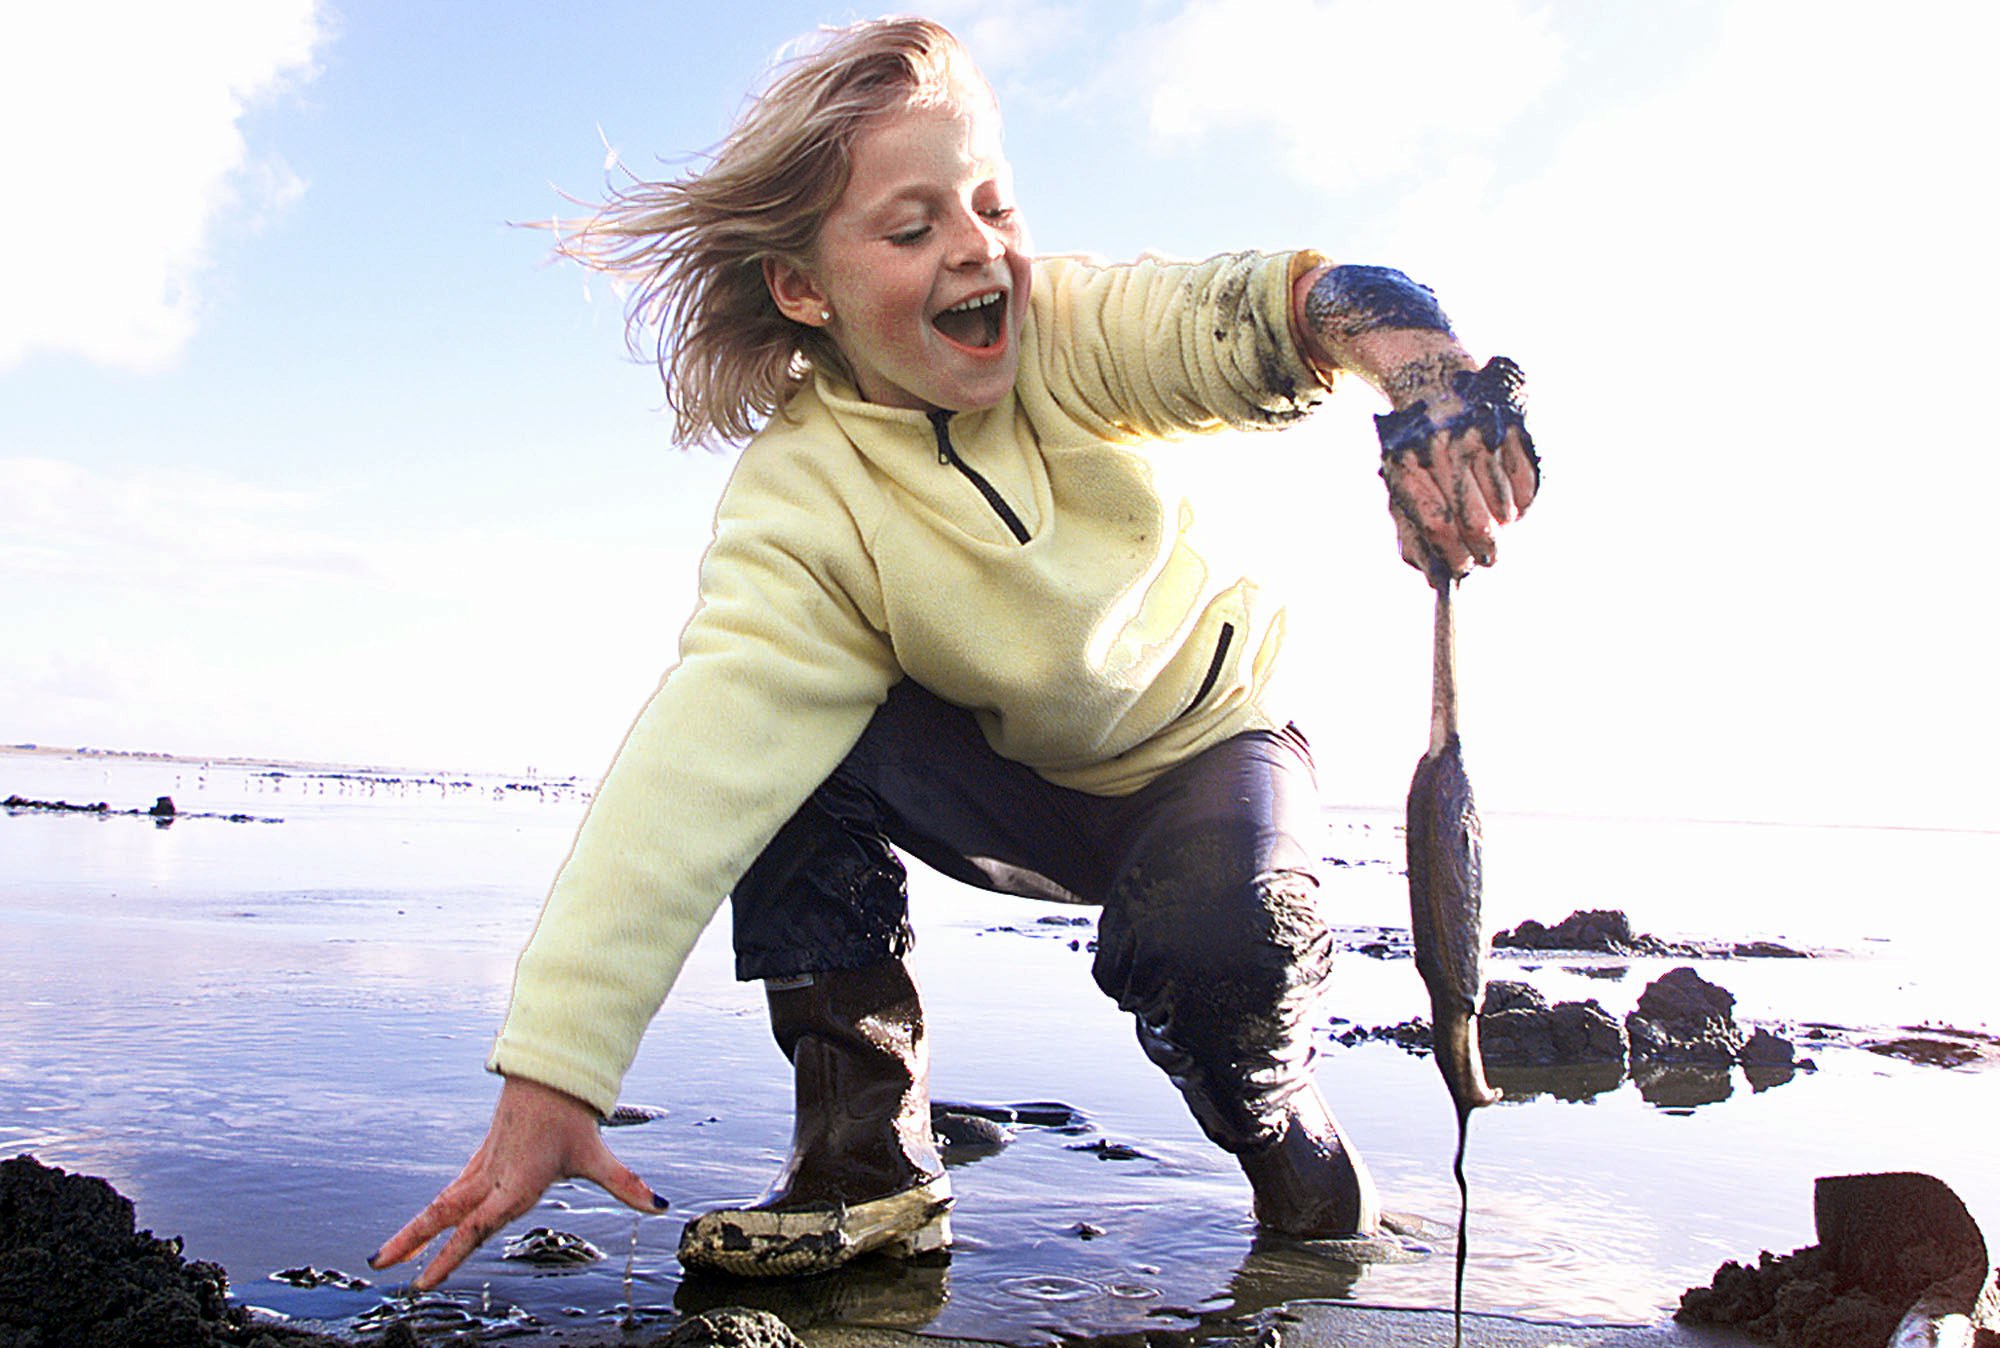 Washington razor clam diggers are anticipated to have an excellent season in 2012-13.